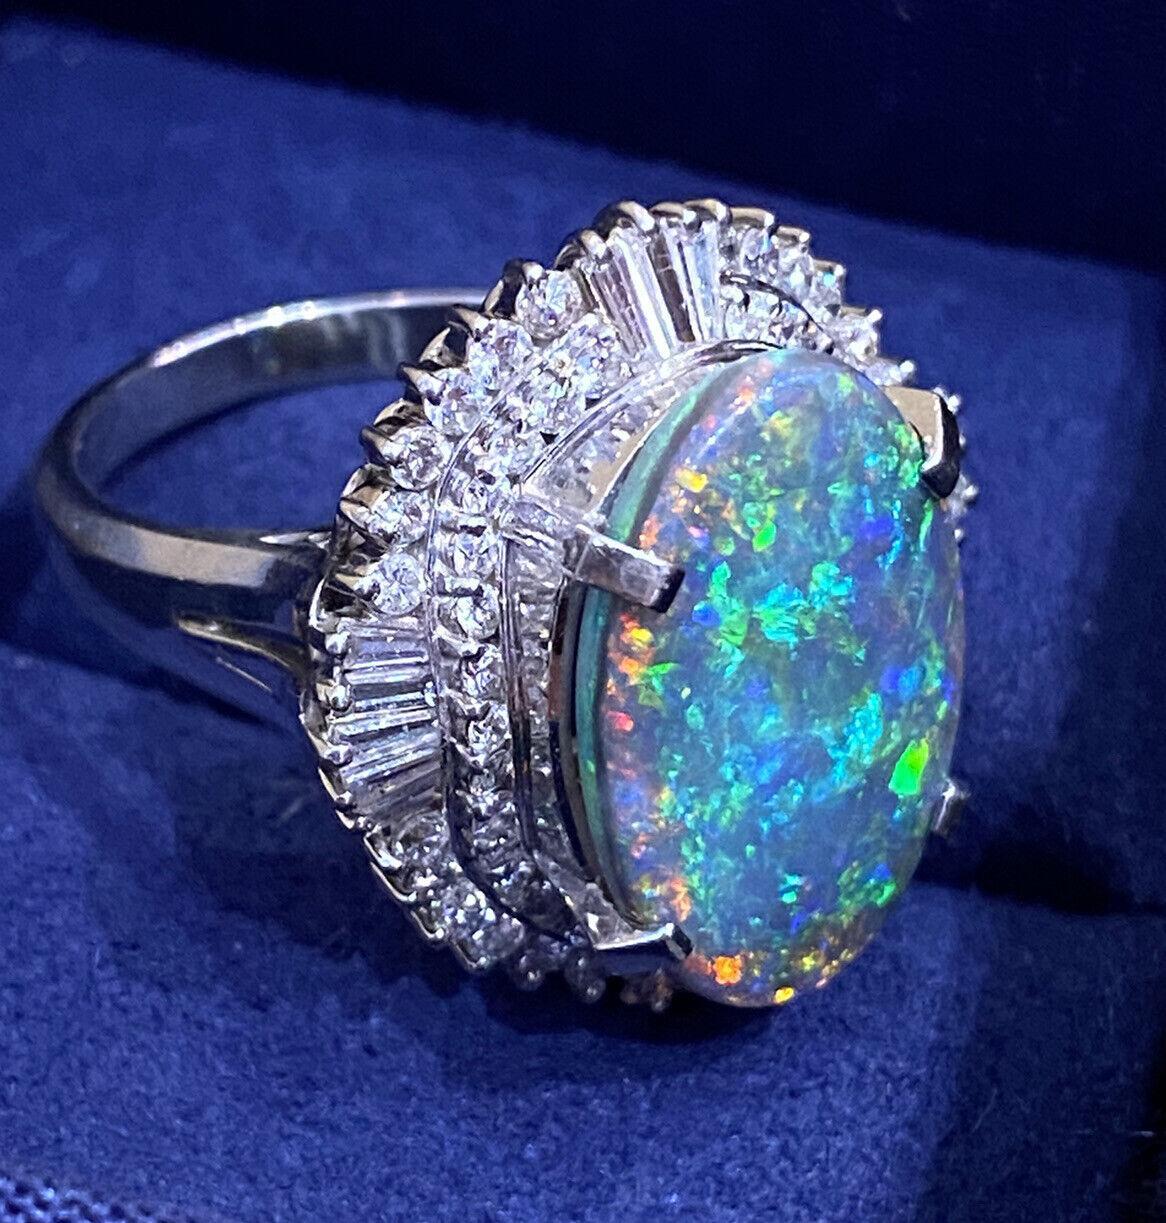 GIA 5.39 carats Black Opal & Diamond Ballerina Cocktail Ring in Platinum In Excellent Condition For Sale In La Jolla, CA